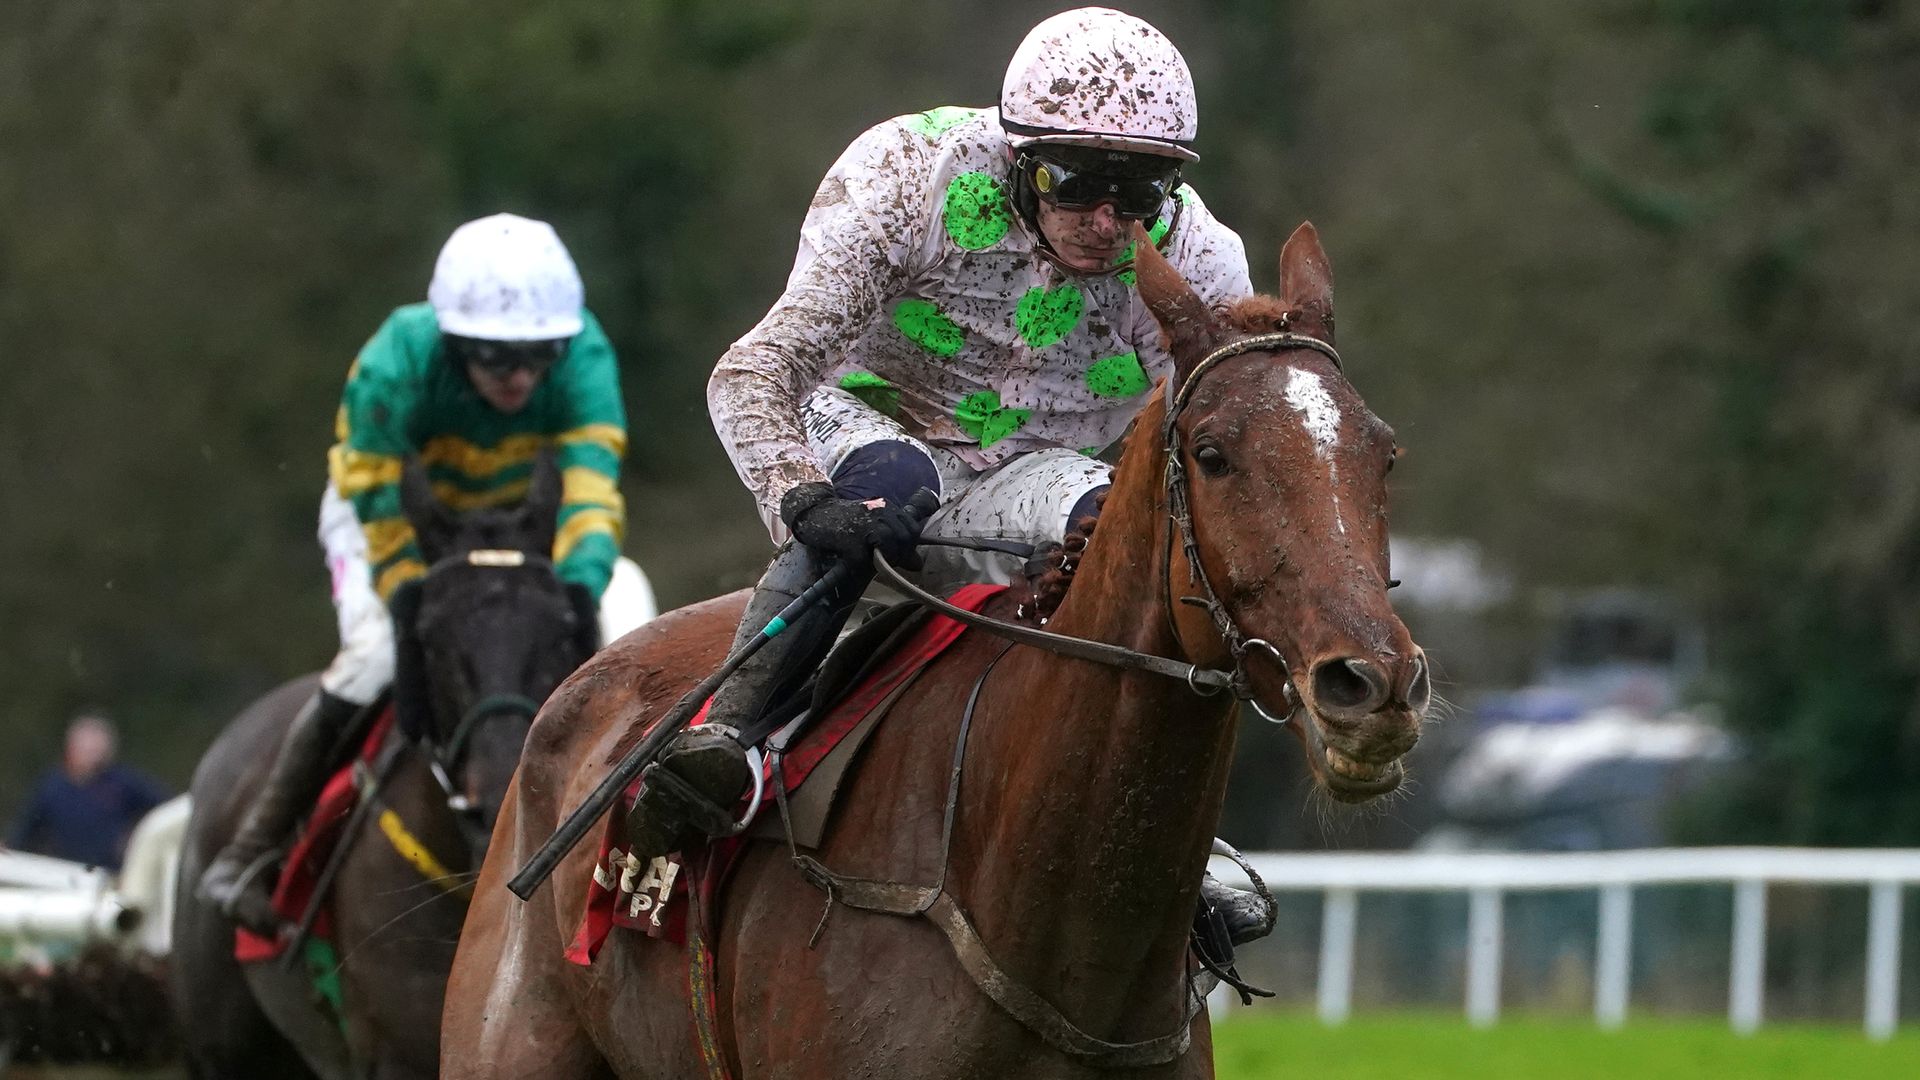 Monkfish into Stayers' Hurdle picture with dominant Galmoy victory